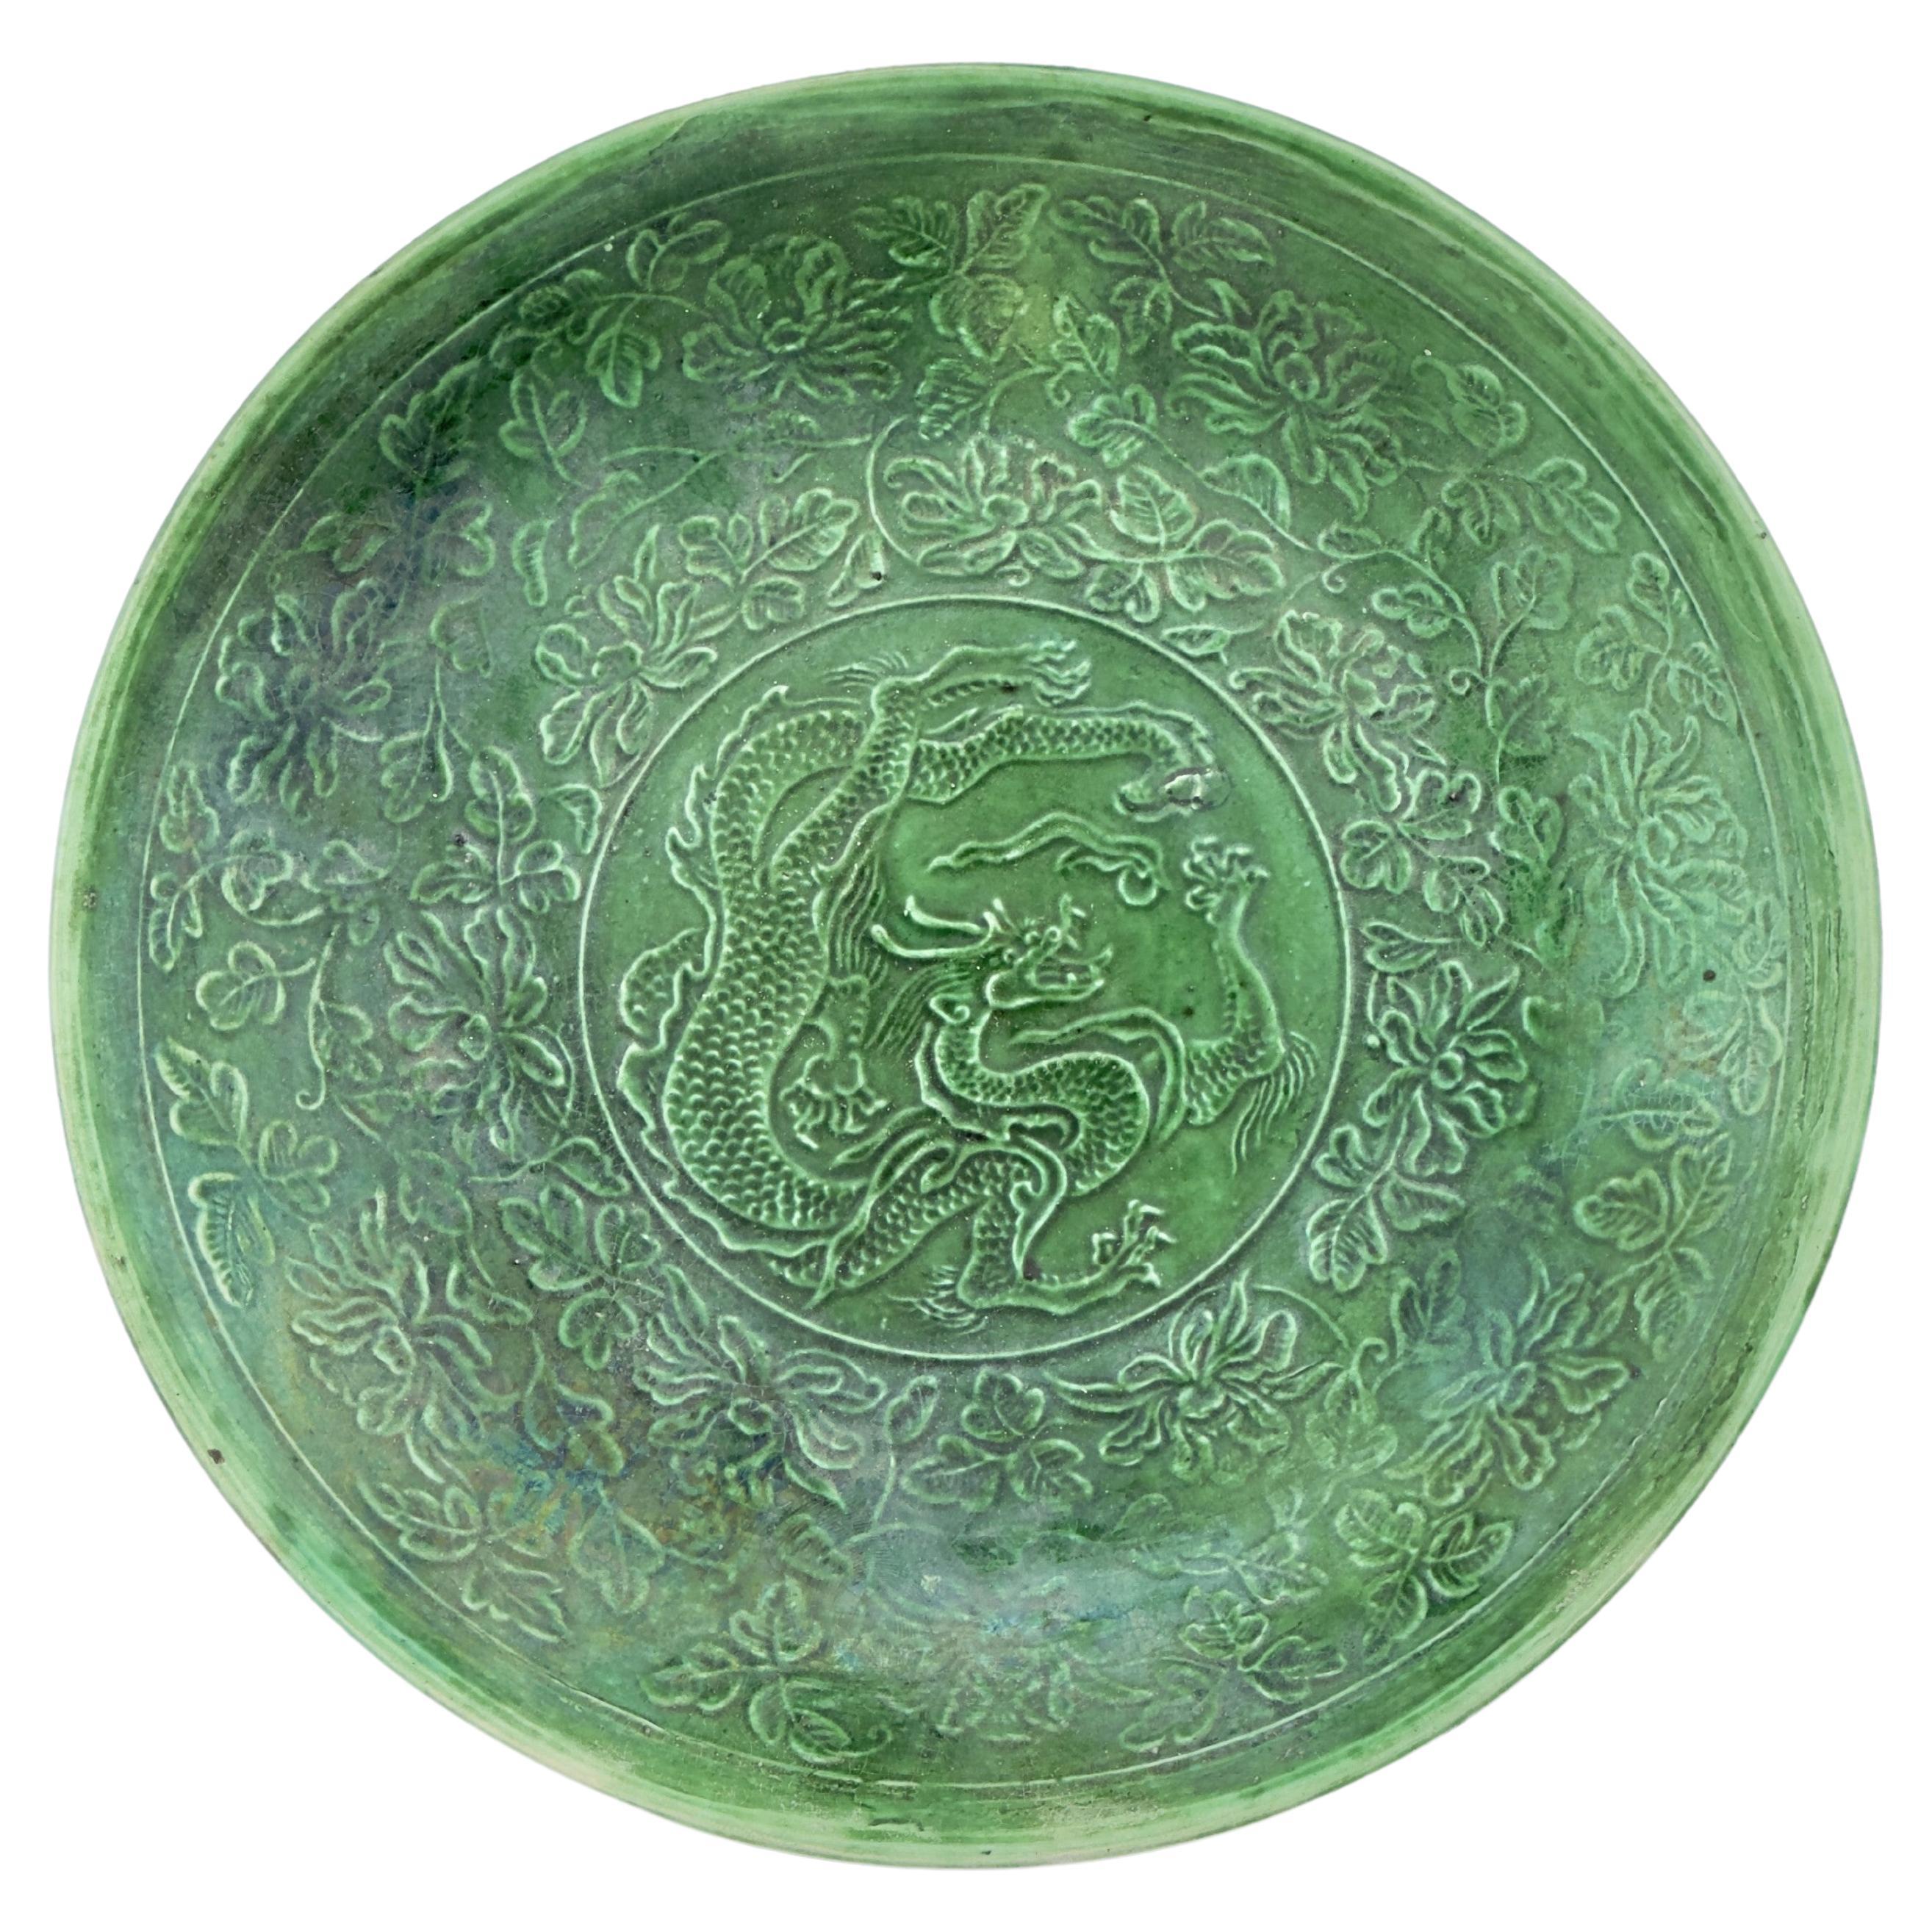 A Rare Dingyao Green-Glazed Dragon Dish, Northern Song Dynasty